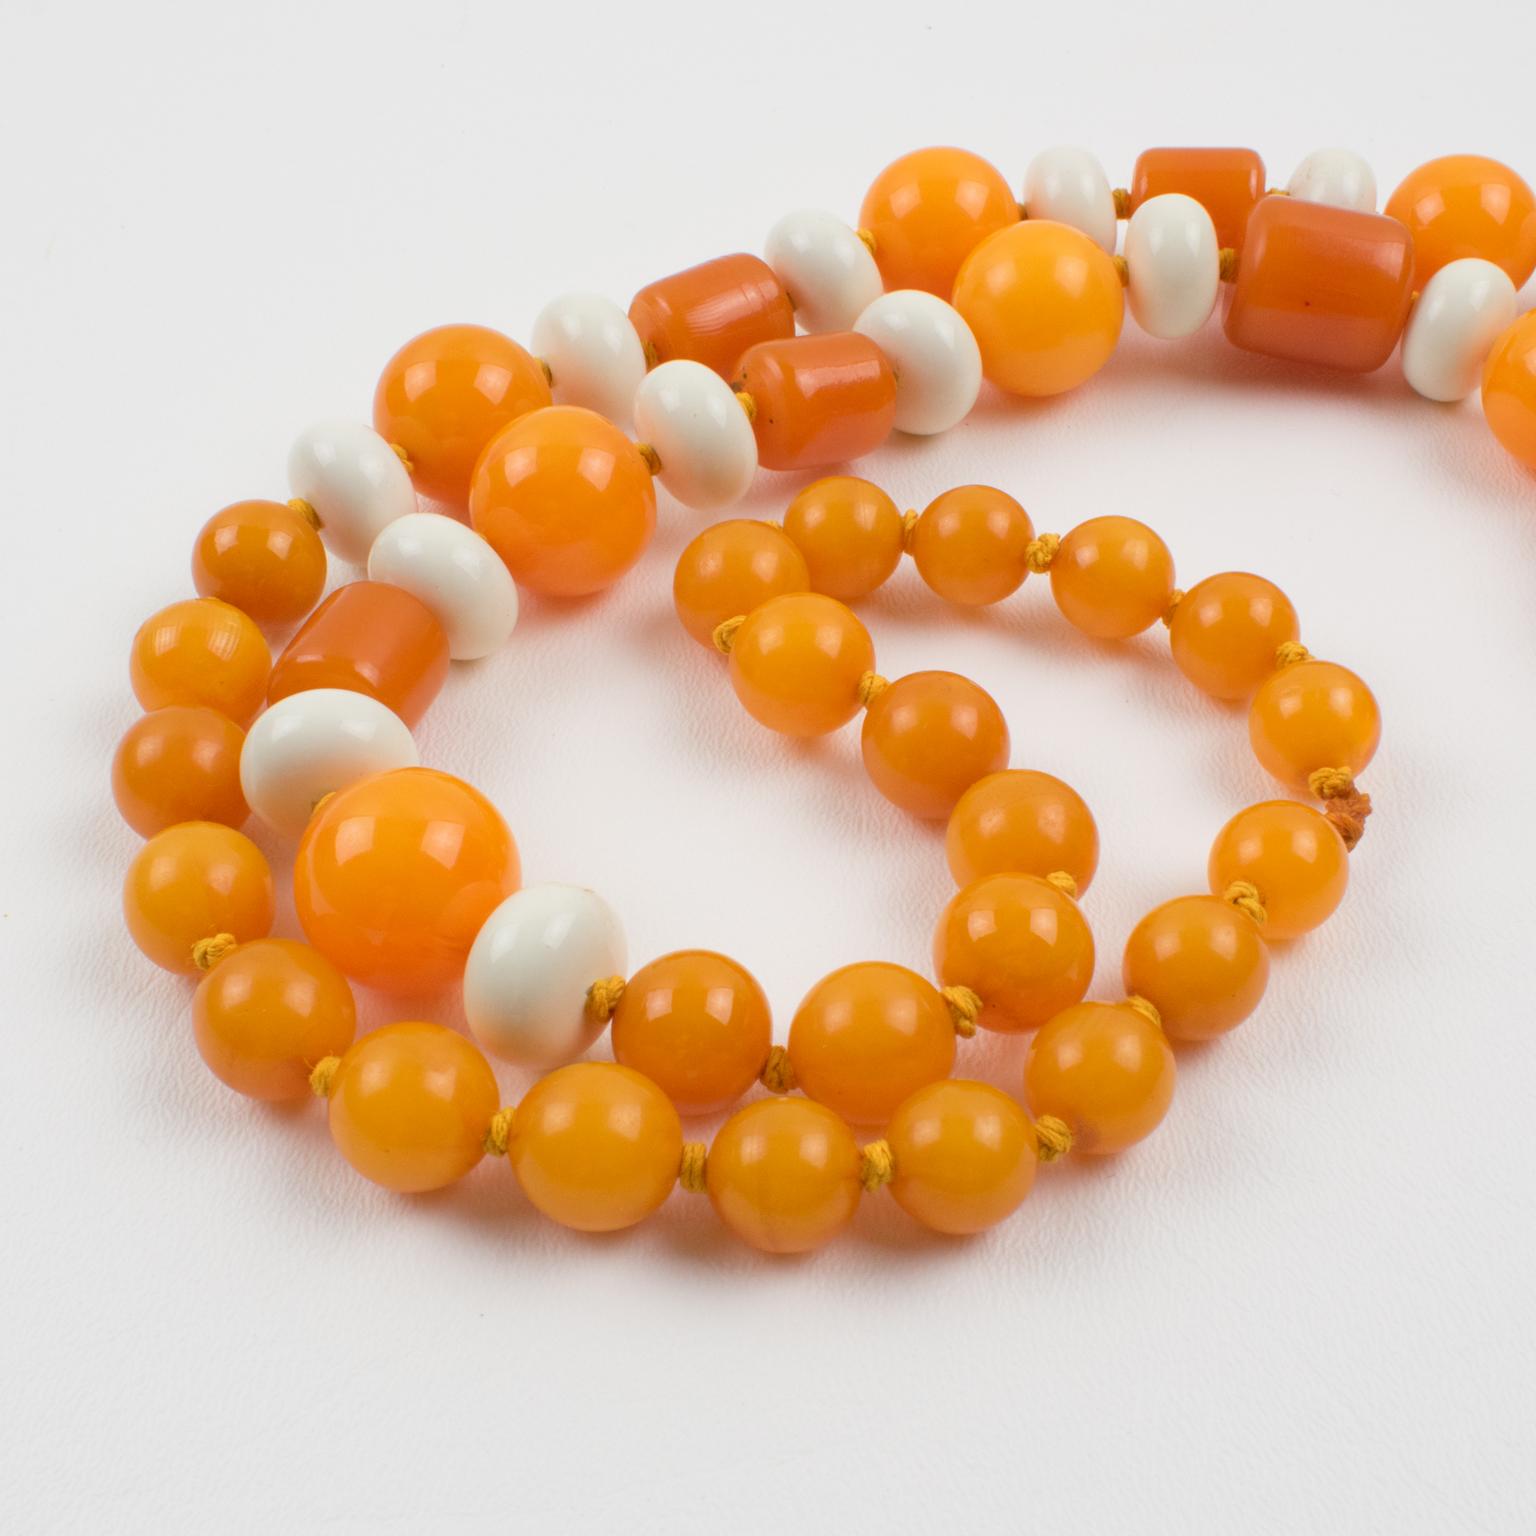 Bakelite and Lucite Long Necklace Orange and White Colors For Sale 6